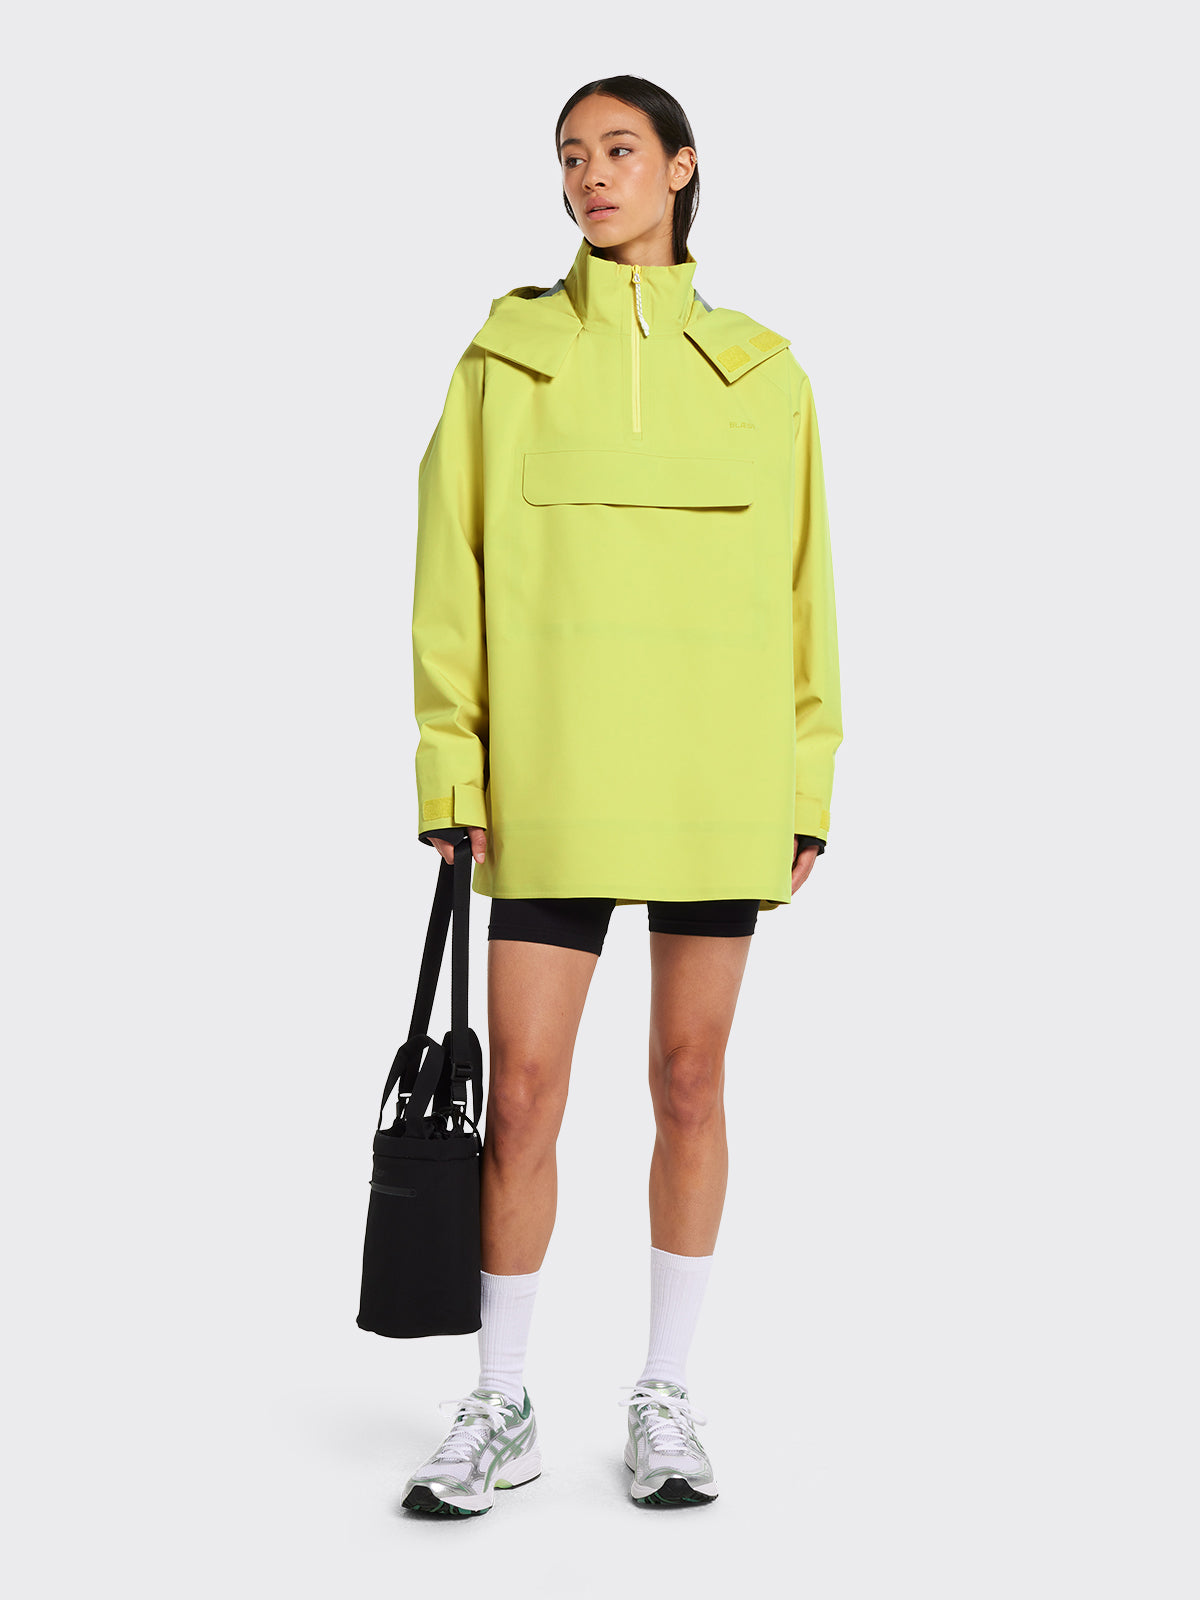 Woman in Voss poncho in the color Muted Lime from Blæst